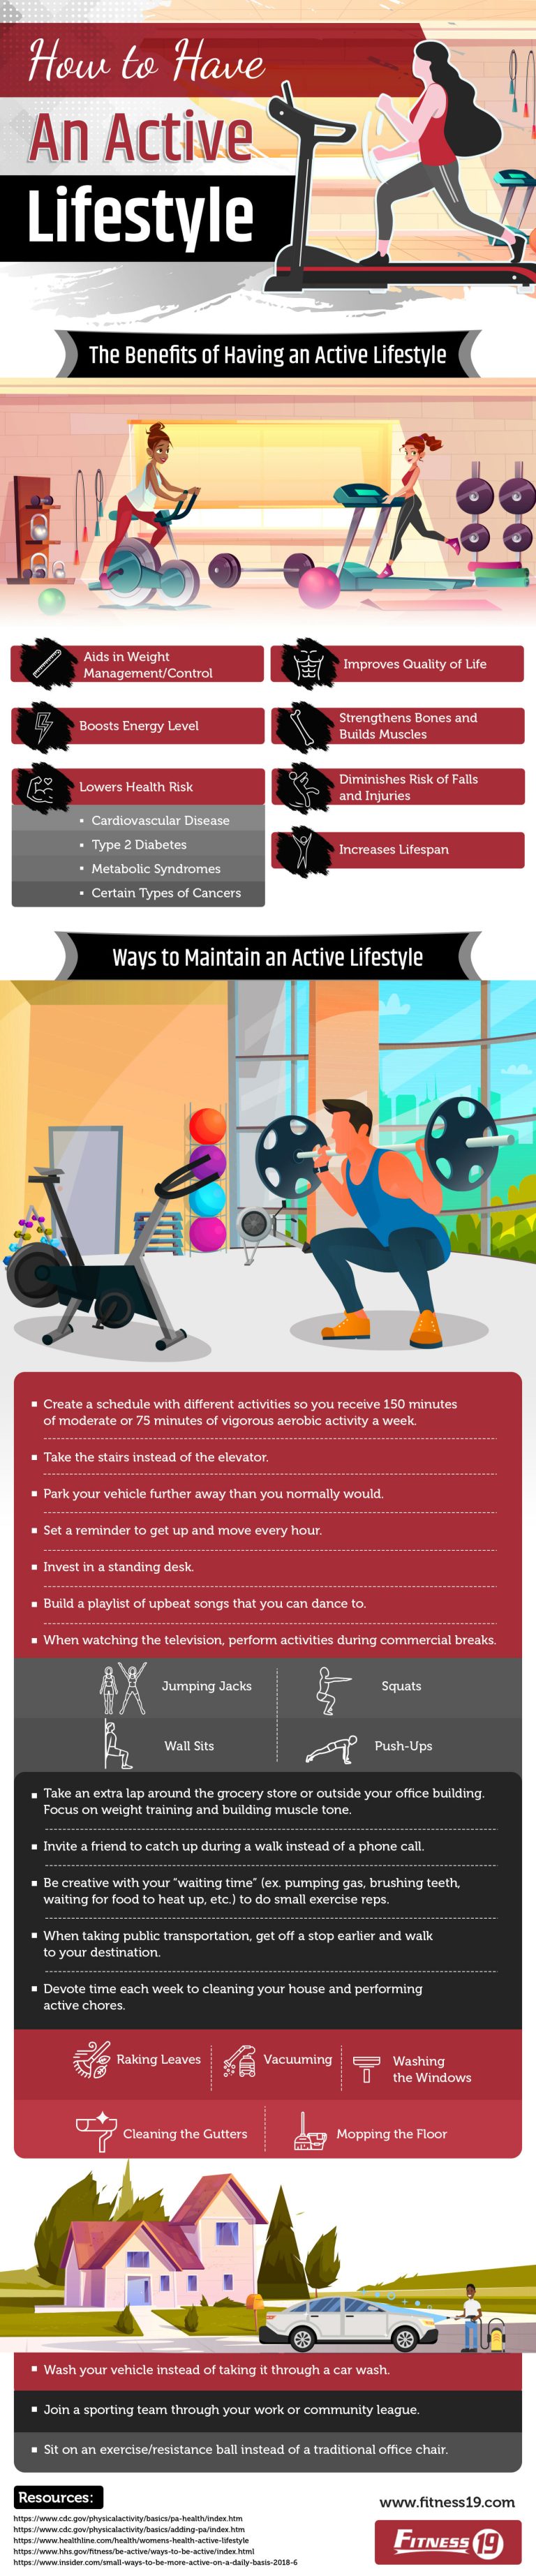 How-to-Have-an-Active-Lifestyle